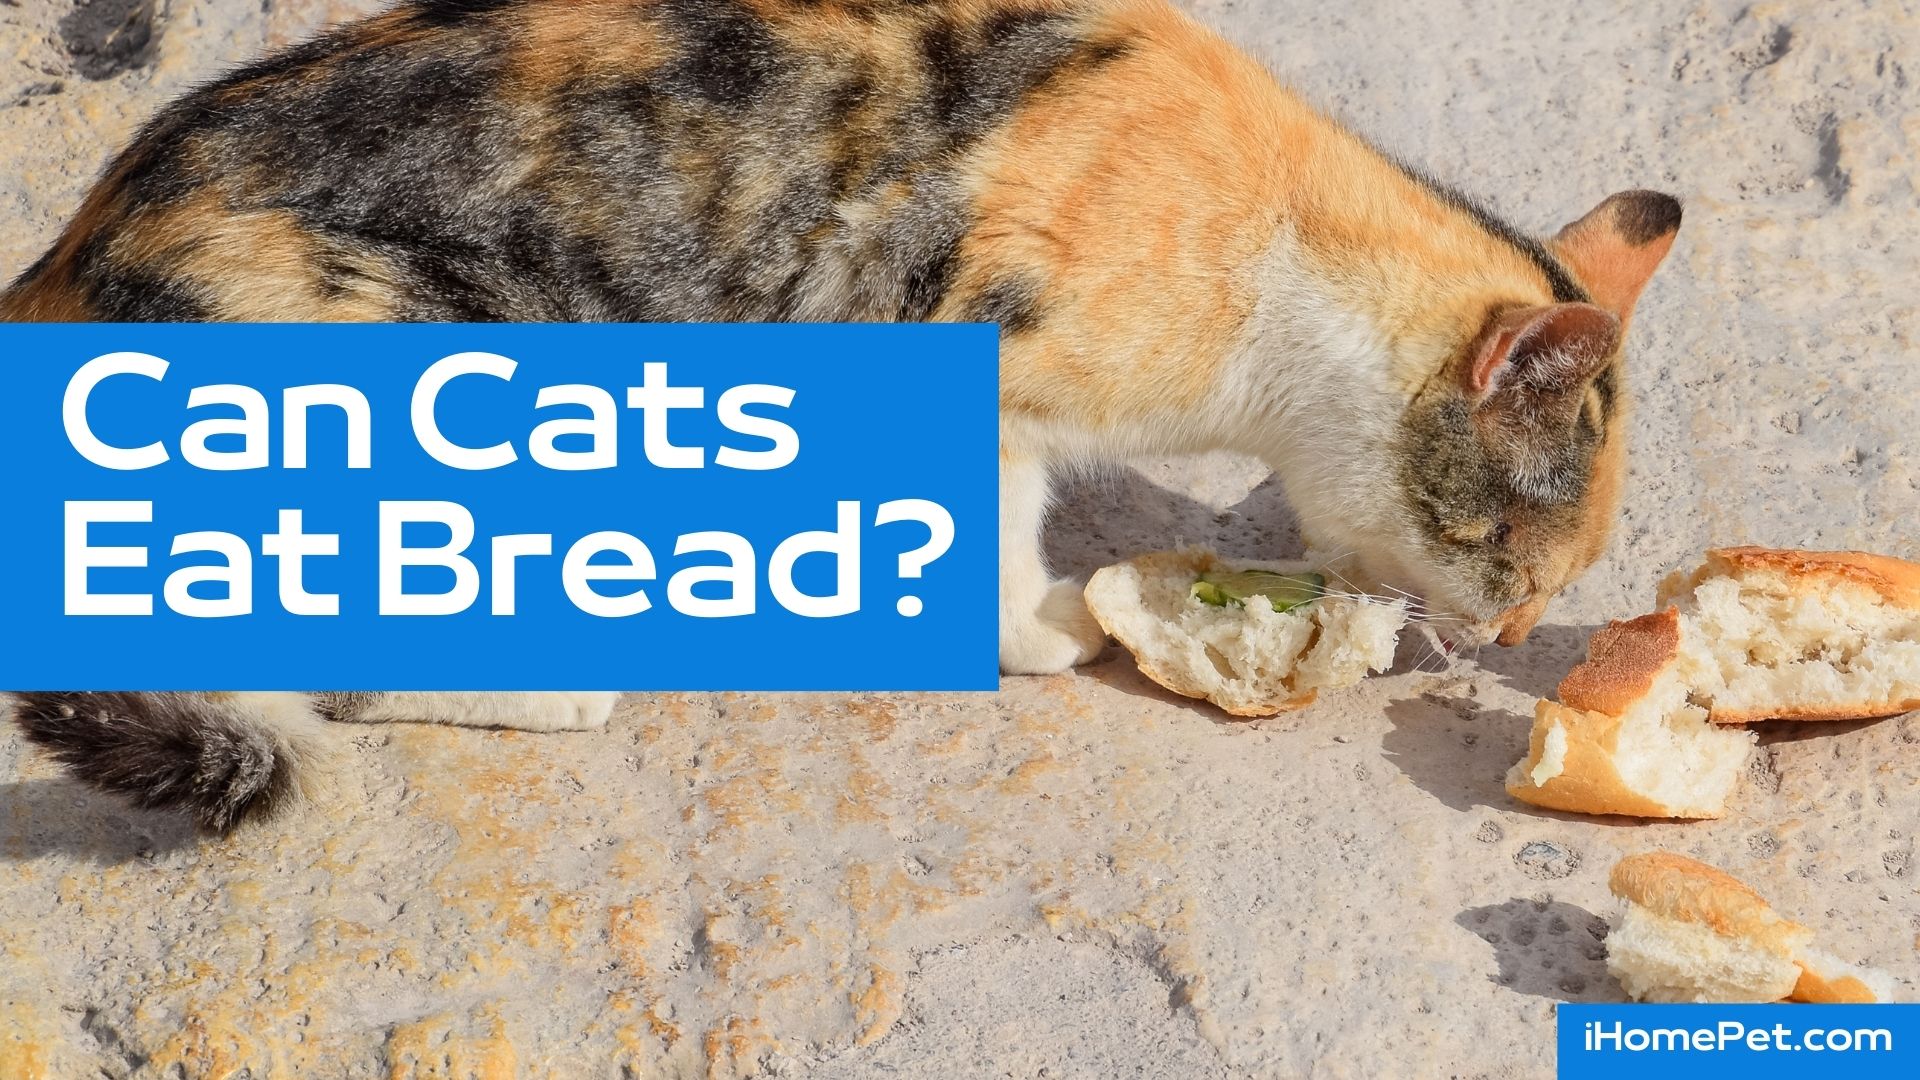 Cats sneaking slices of plain bread fiend or other human foods